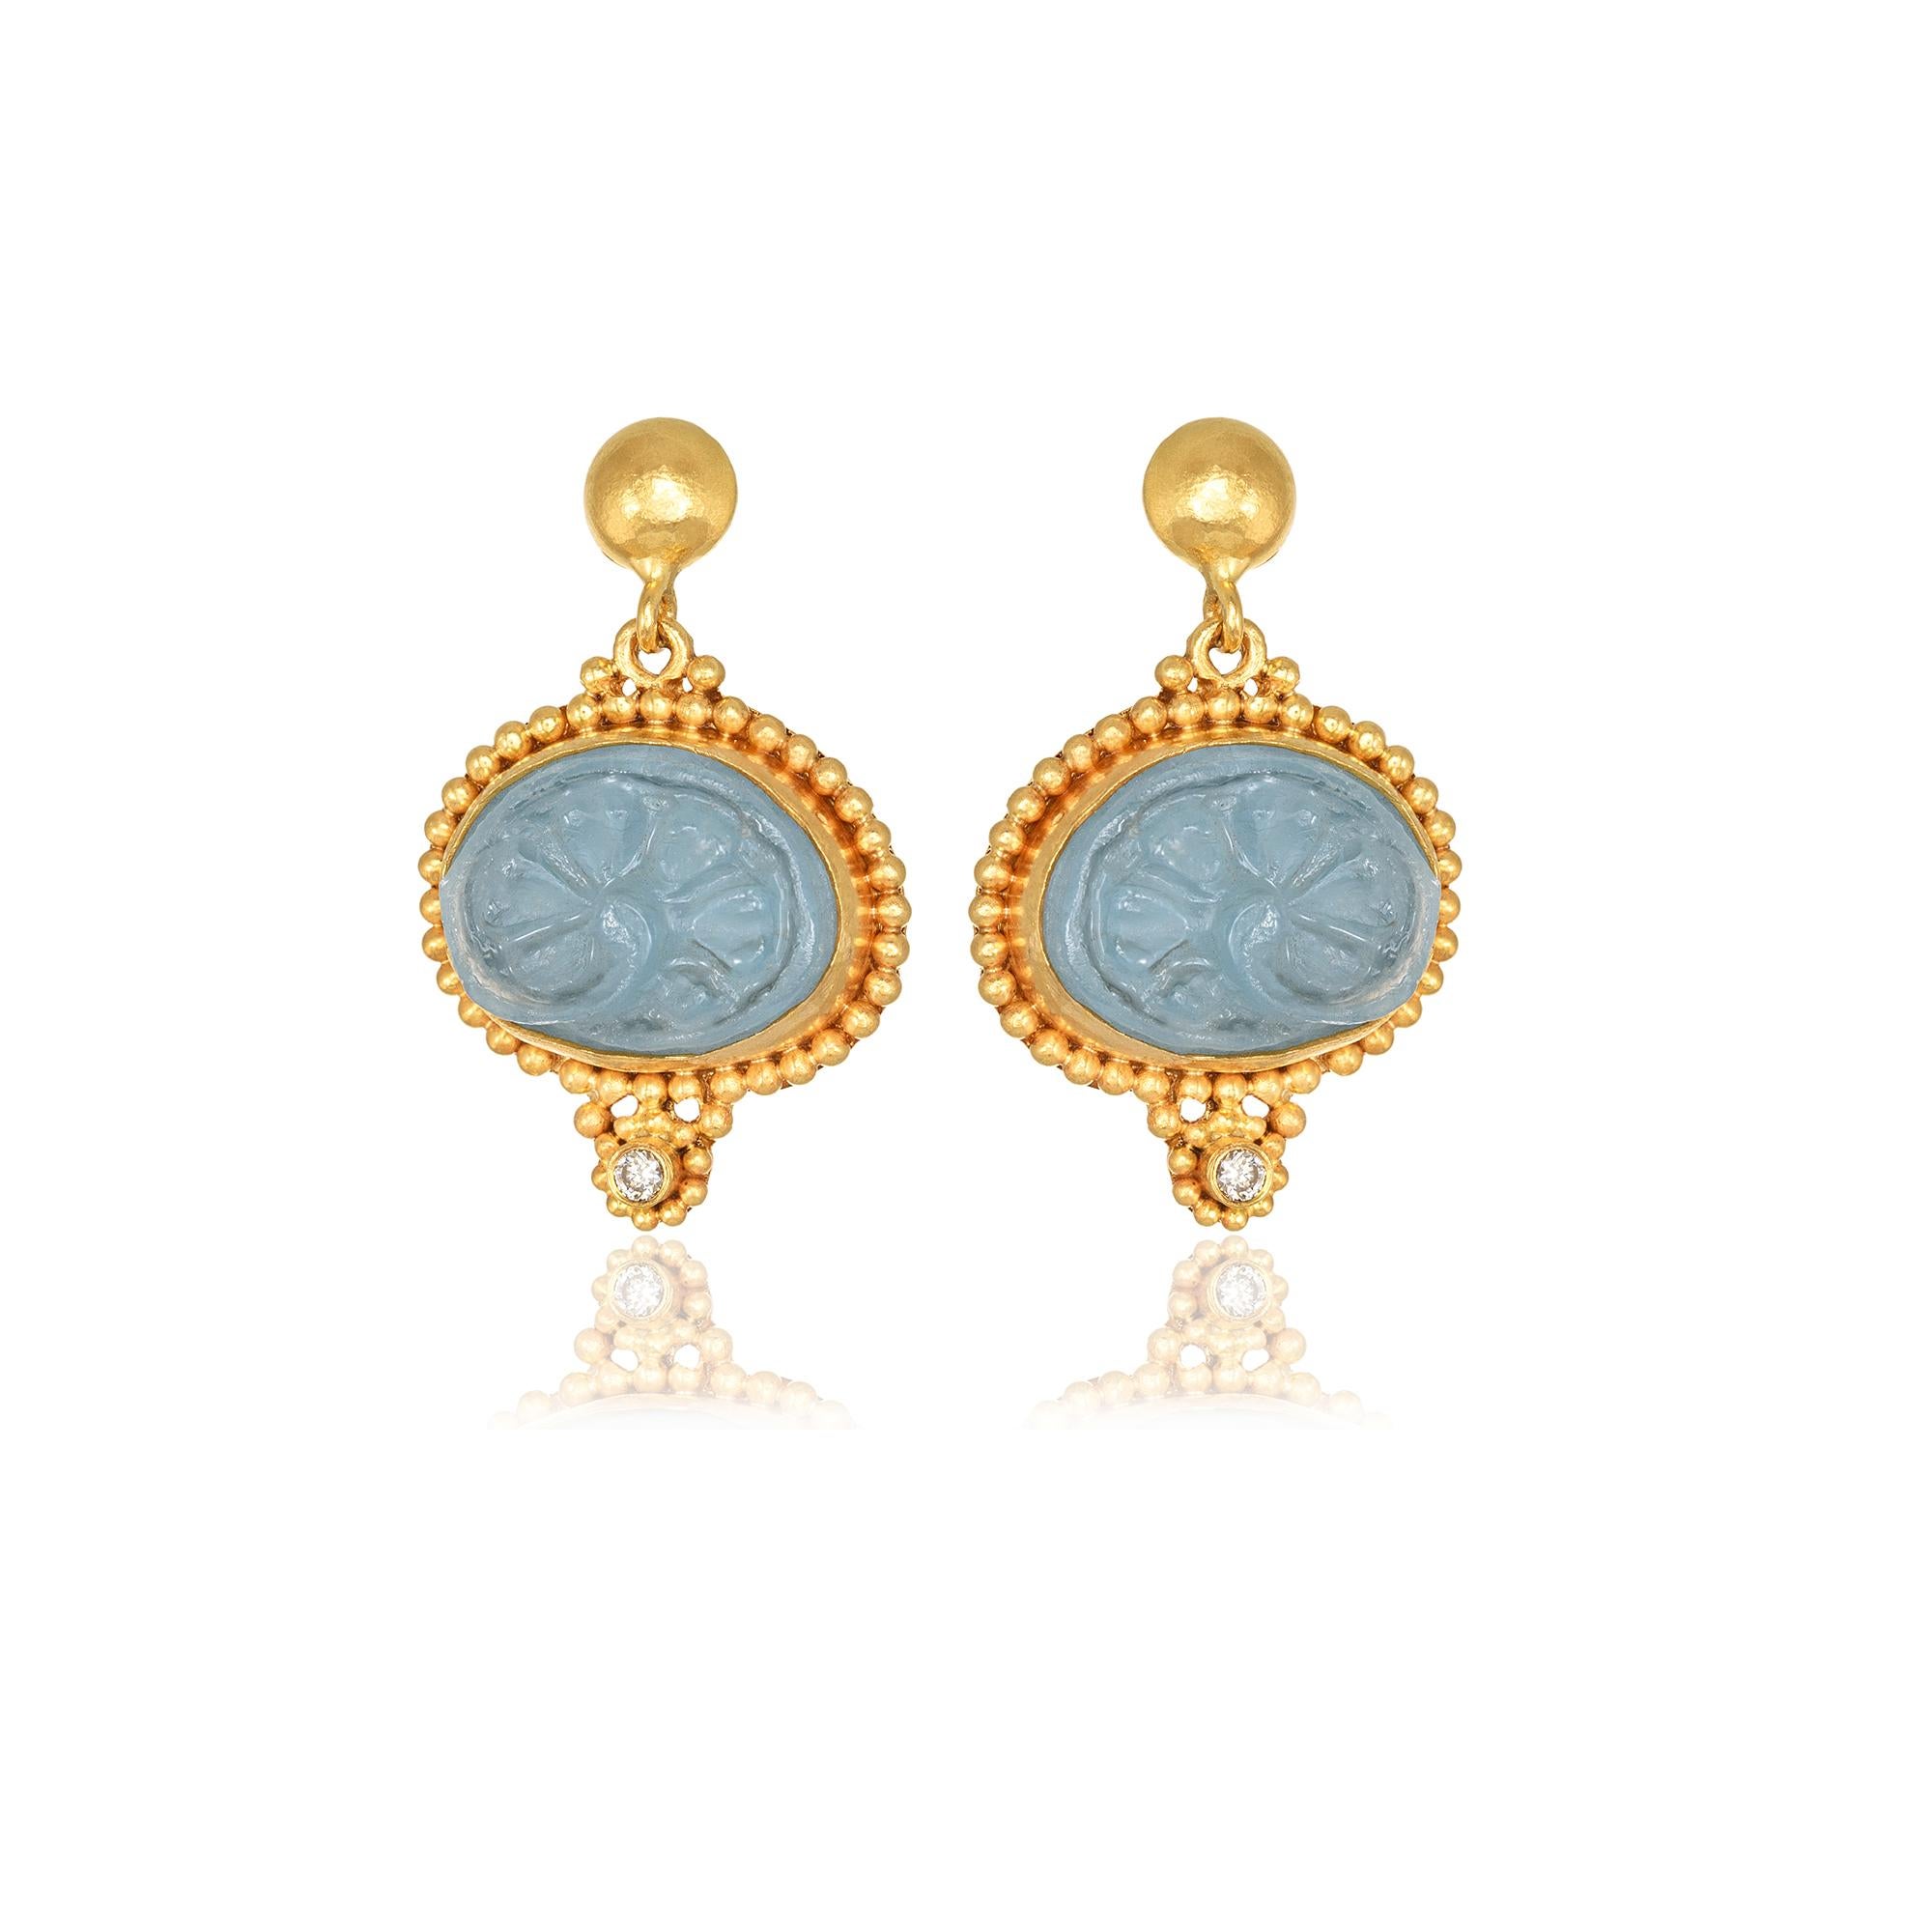 Oval drop earrings handcrafted in 22Kt yellow gold, featuring a carved Aquamarine and brilliant cut diamonds. This One-Of-A-Kind pair of earrings is created using the traditional techniqus of hand hammering and granulation. The minute gold beads are